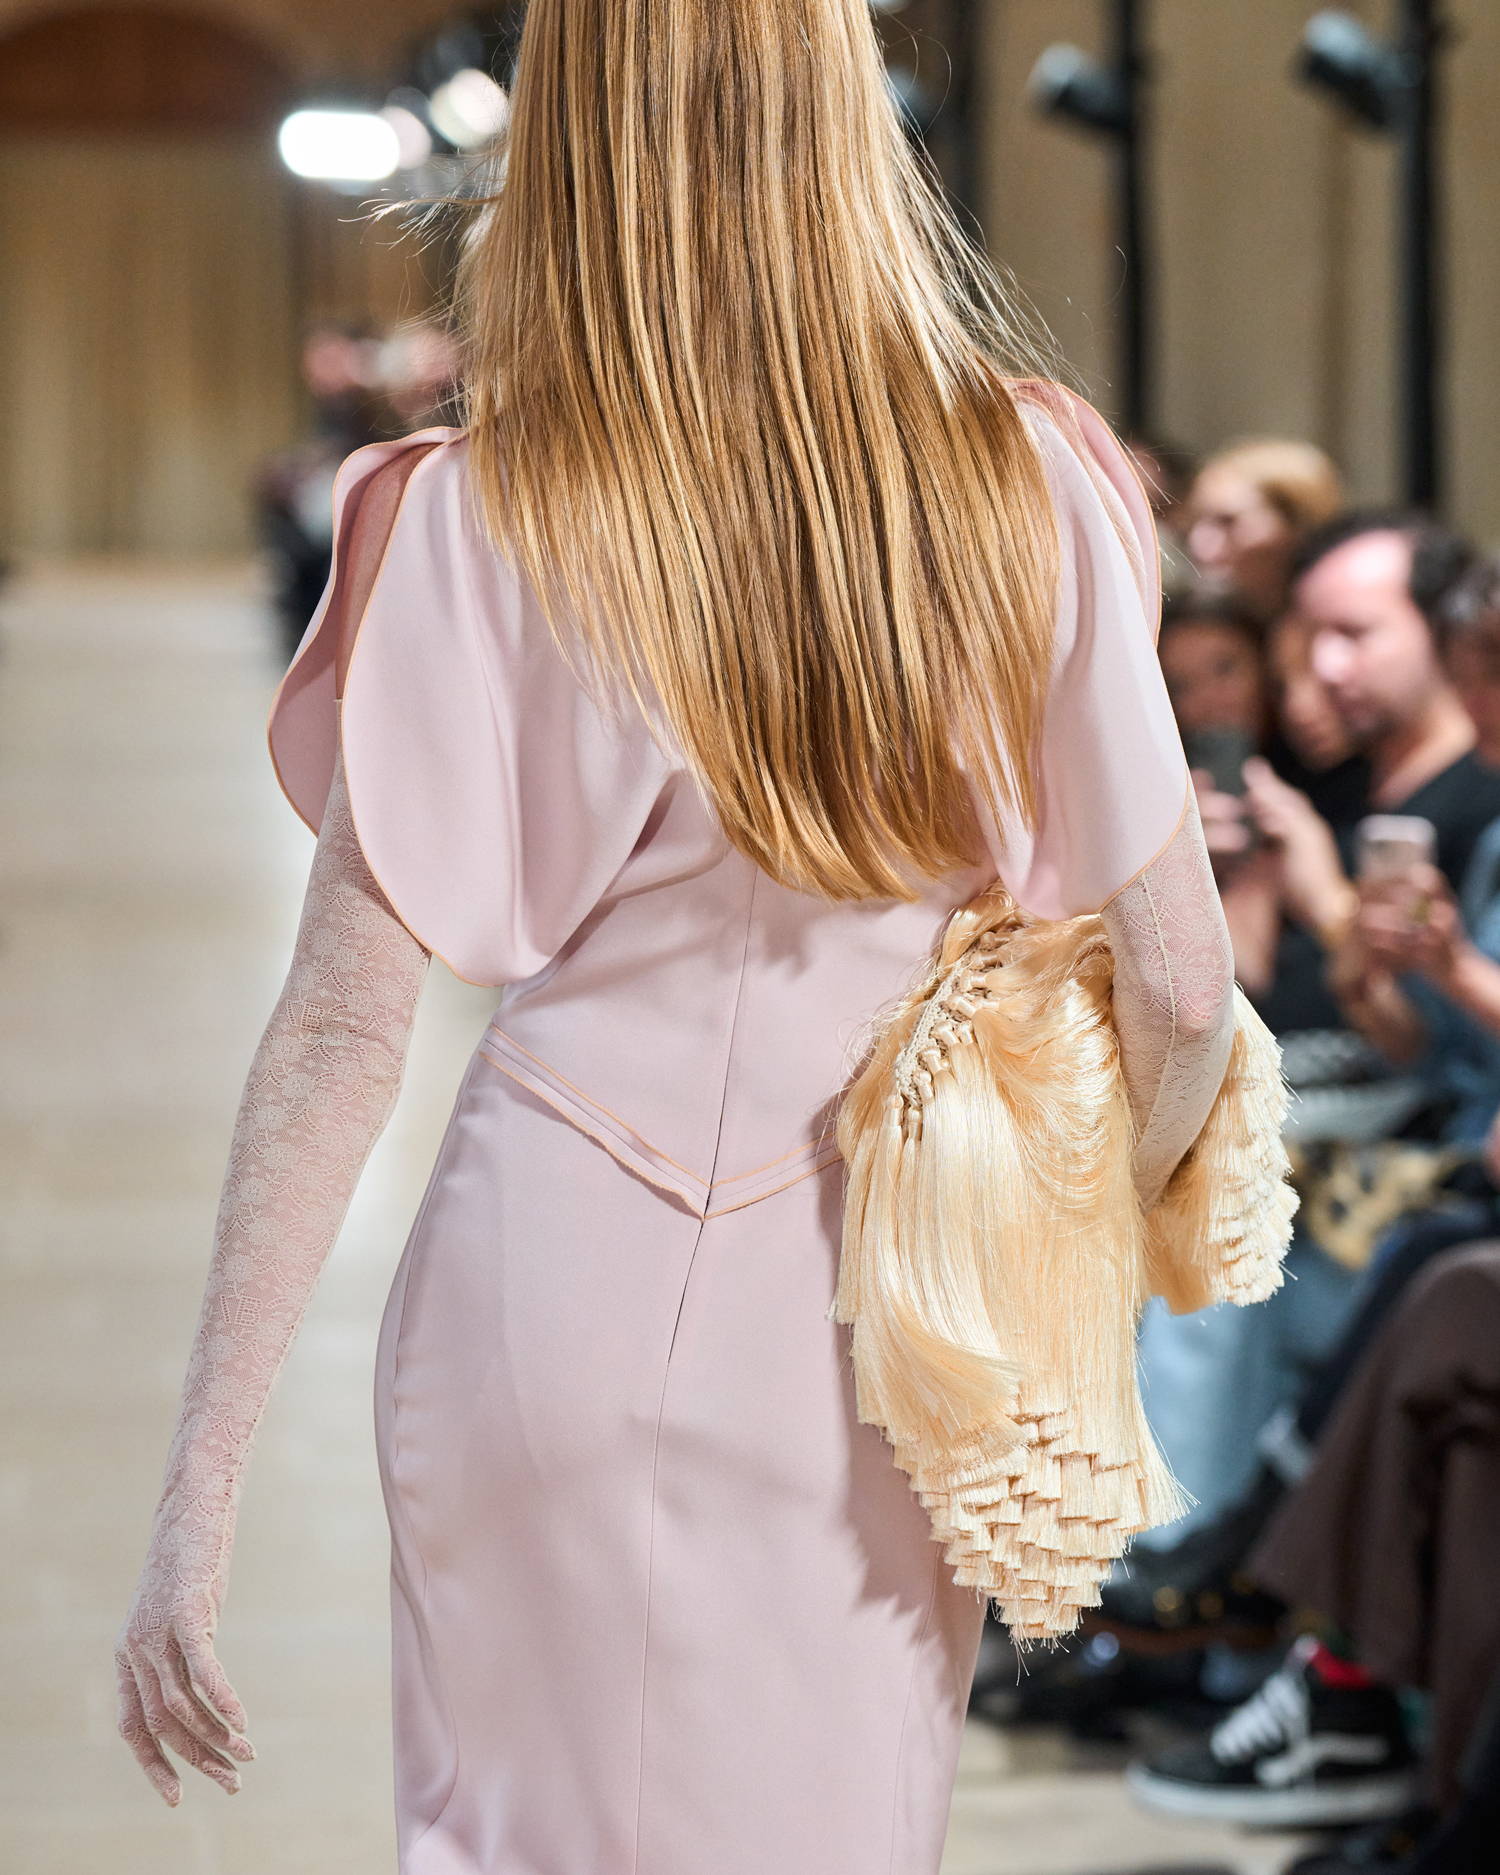 Valentino Spring Summer 2020 Bag Preview